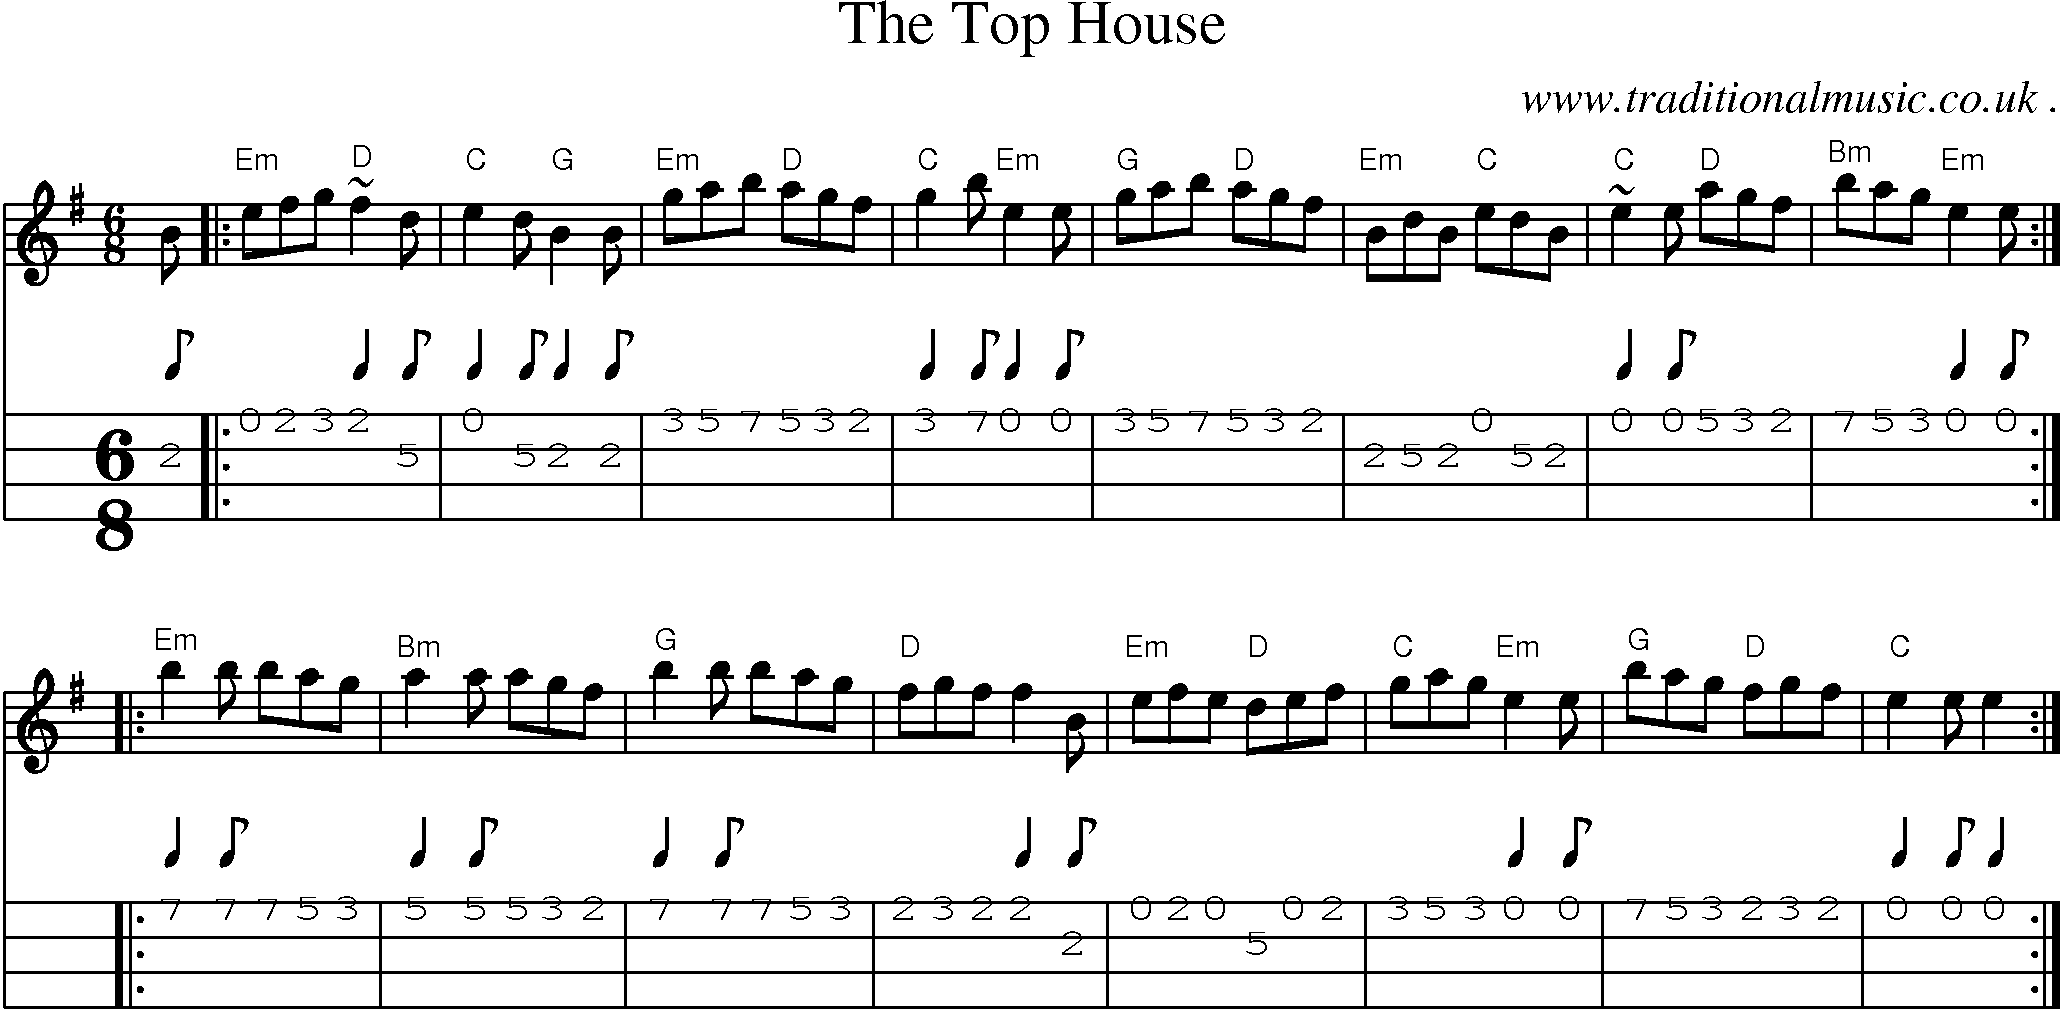 Sheet-music  score, Chords and Mandolin Tabs for The Top House